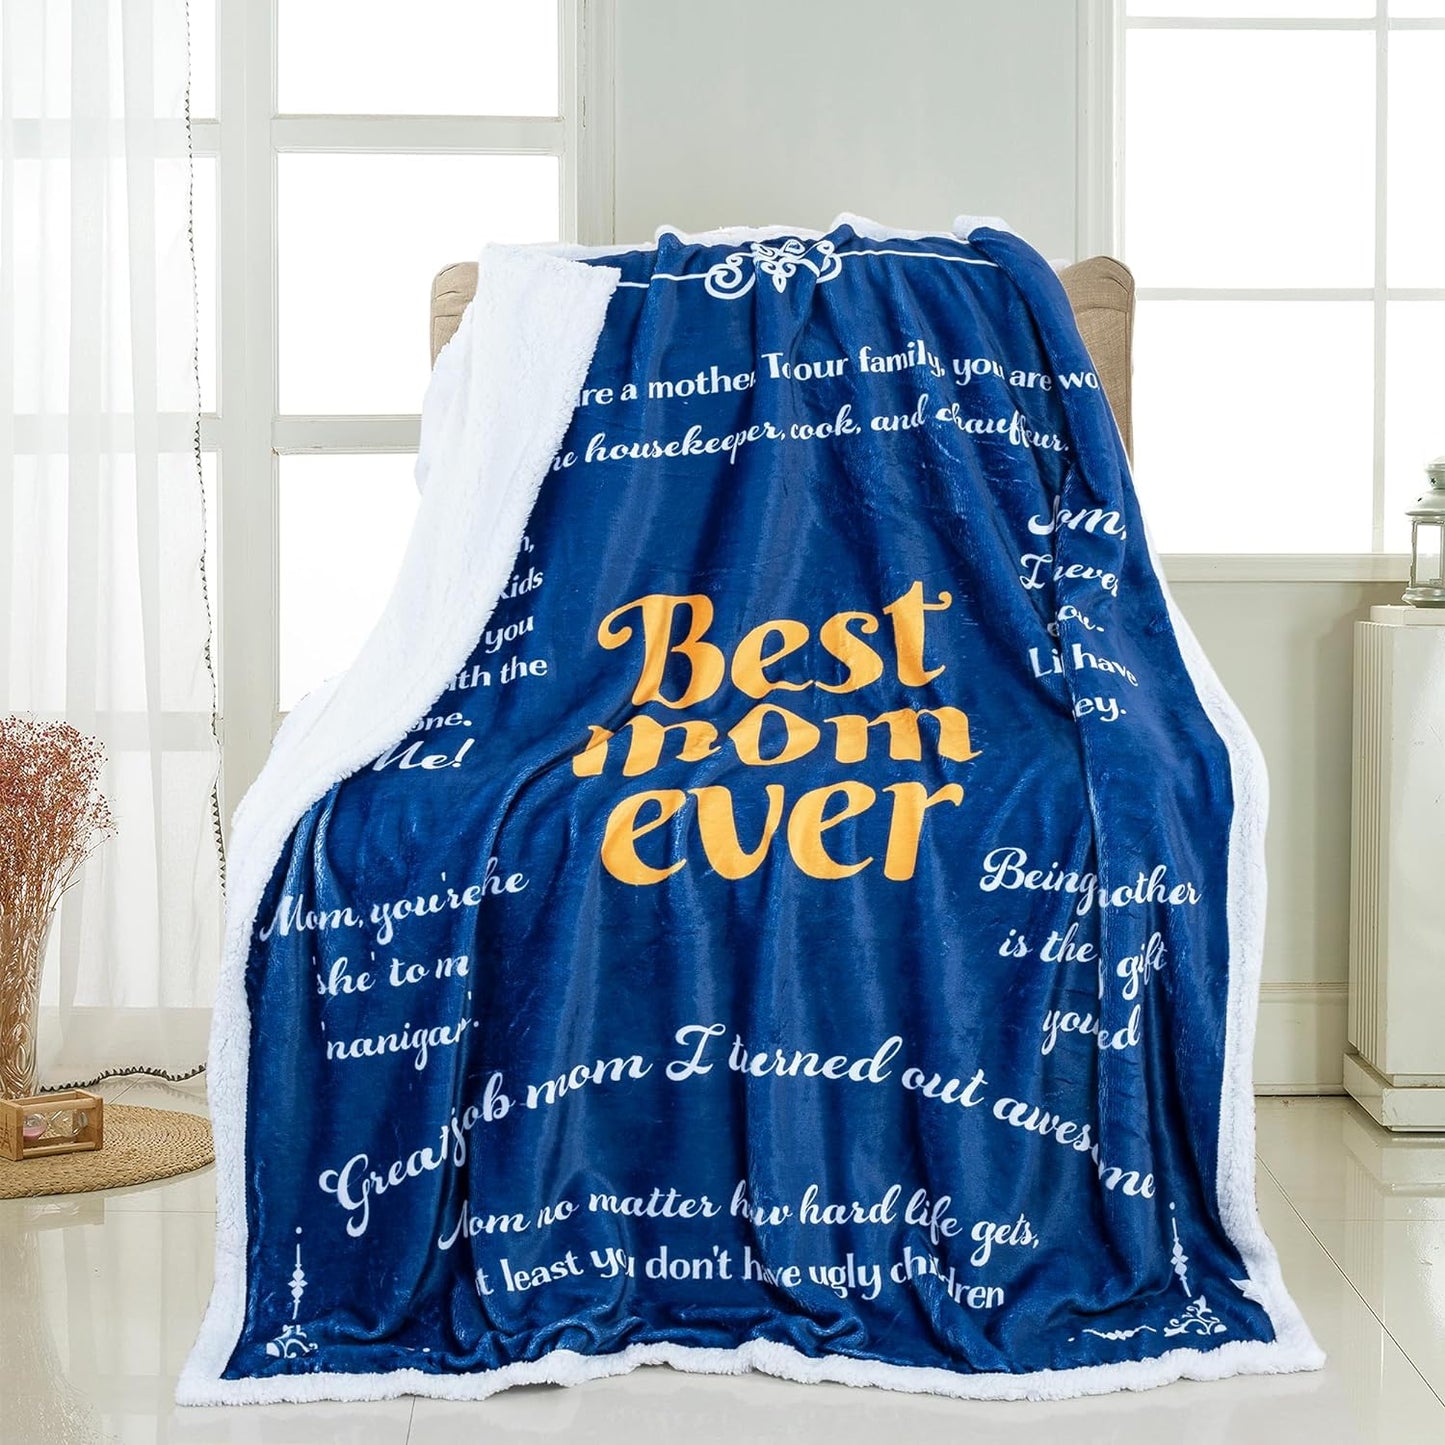 Piwaka Best Mom Ever Blanket, a Funny Gift That Ticks All The Right Boxes - Bring Laughter & Warmth to Your Beloved Mother: Christmas, Mother's Day, Birthday Gifts for Mom